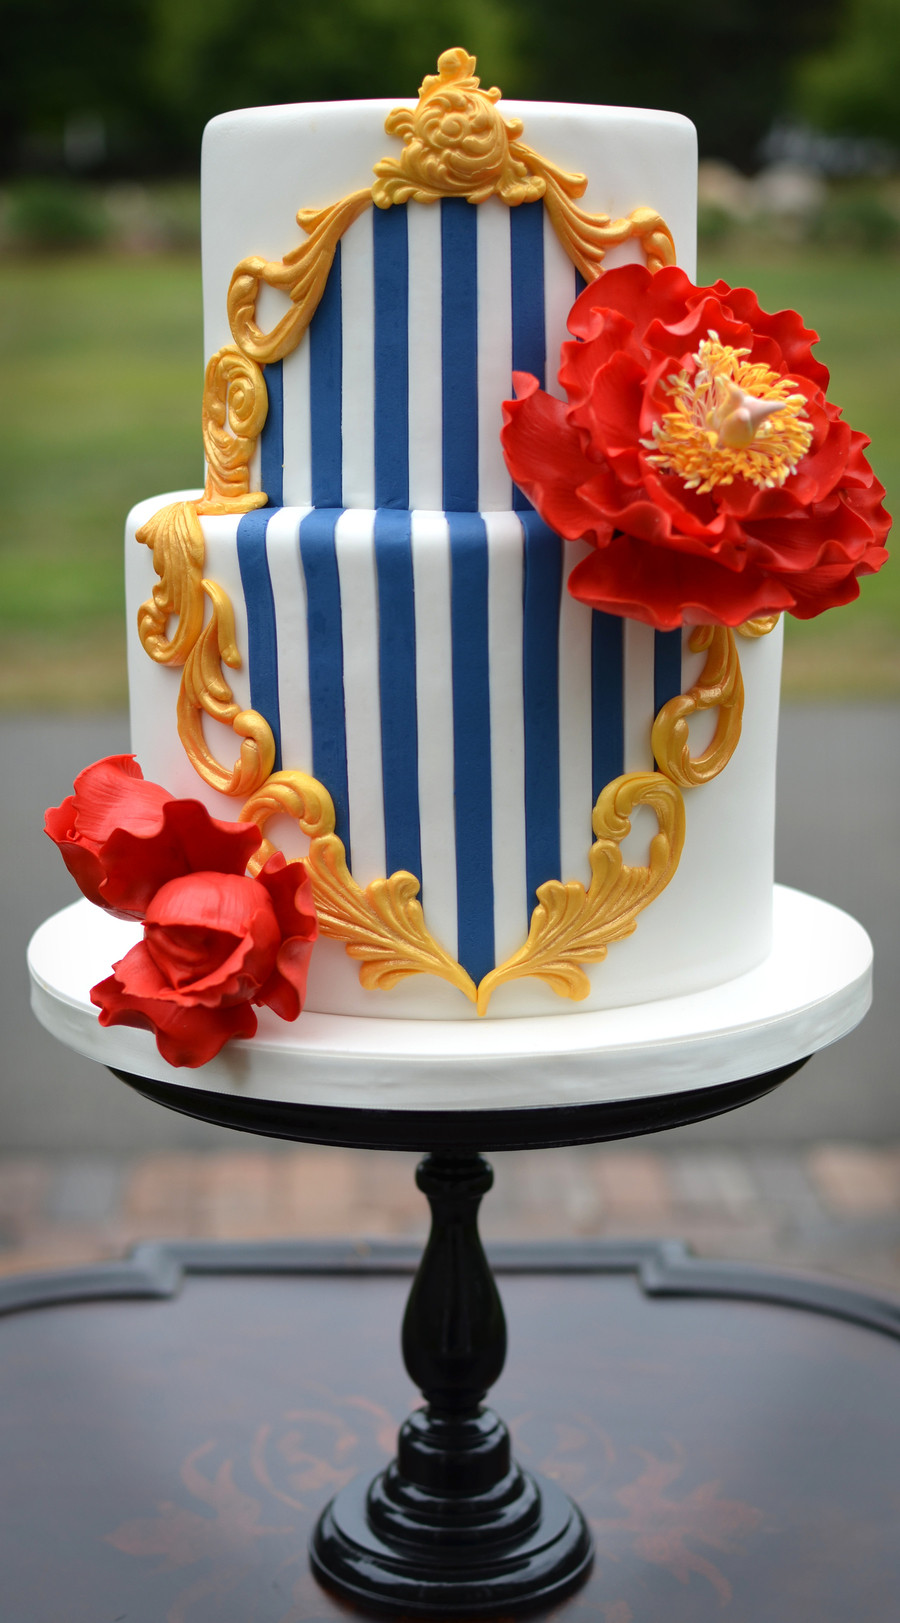 Red White And Blue Wedding Cakes
 Red White Blue And Gold Wedding Cake CakeCentral